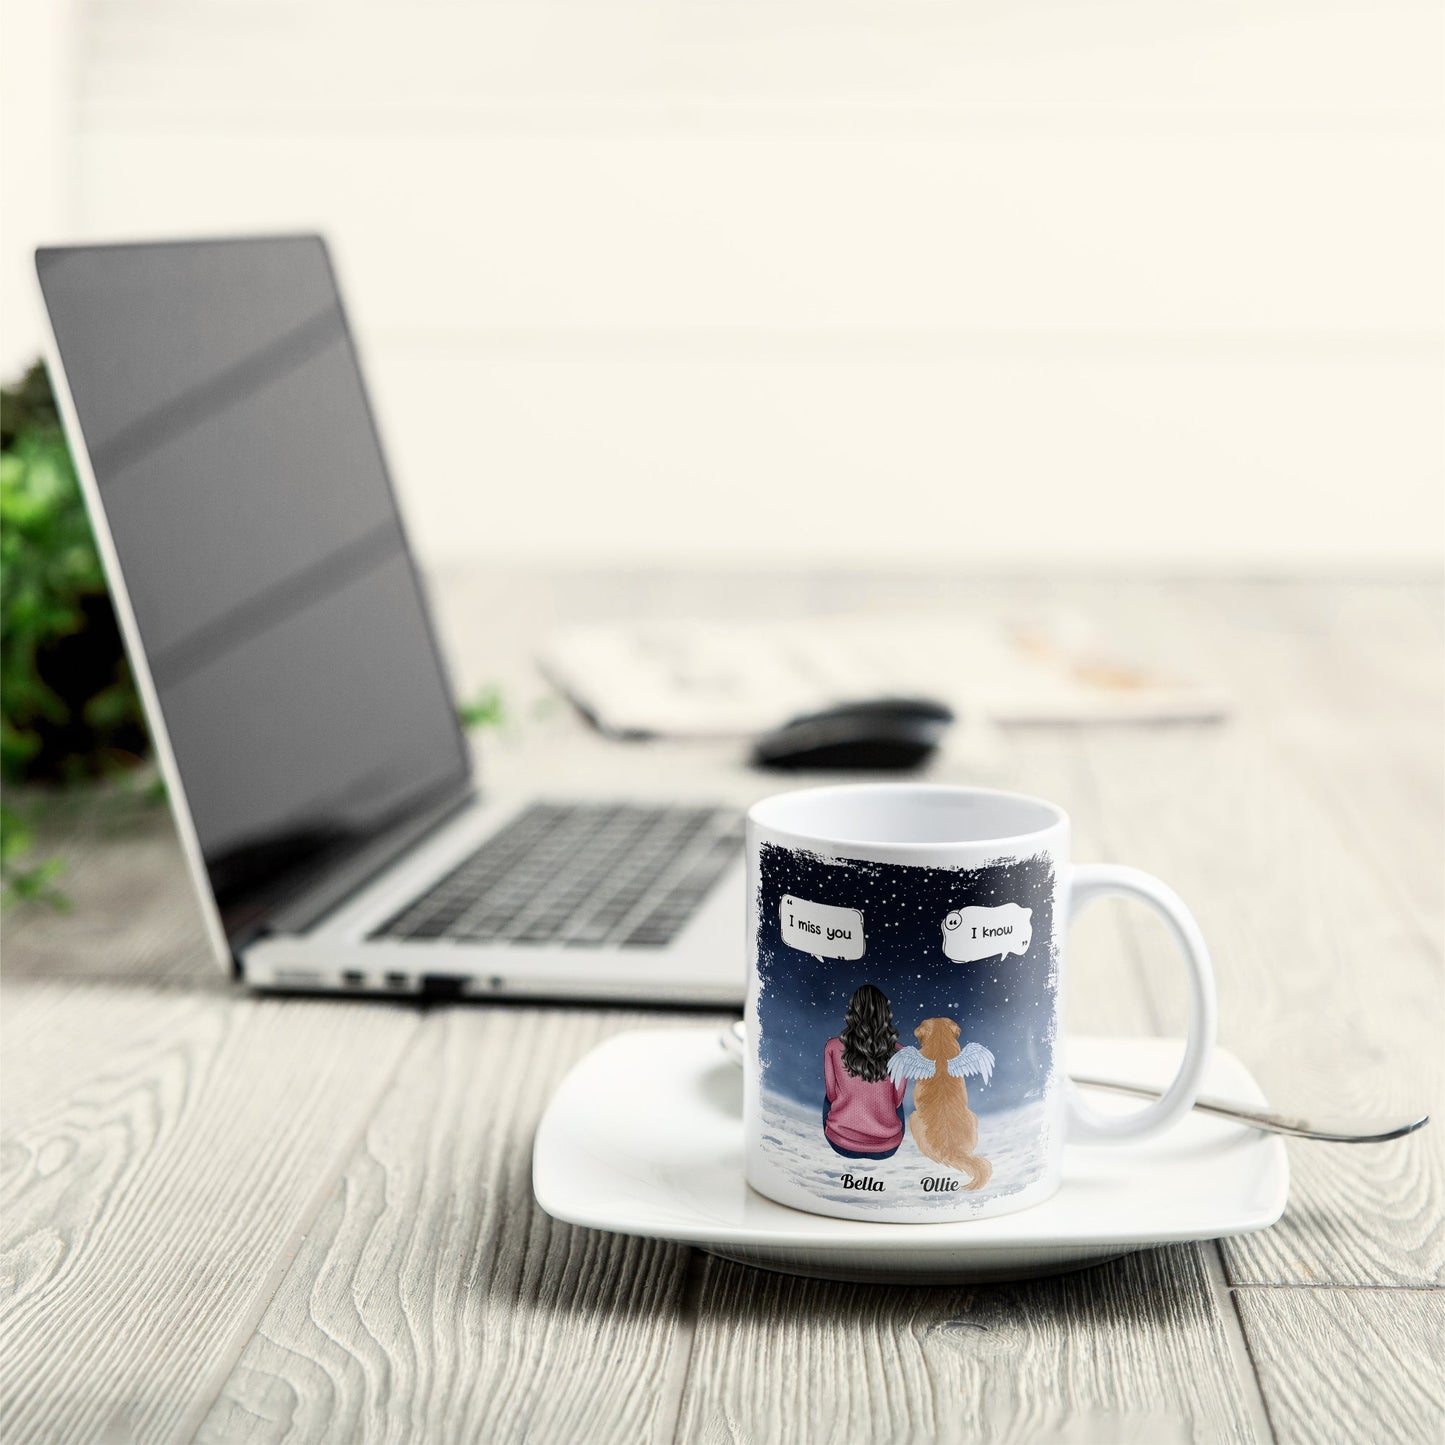 Memorial Pet - Personalized Mug - Christmas, Memorial, Loving Gift For For Pet Loss Owners, Dog Mom, Dog Dad, Cat Mom, Cat Lover, Dog Lover